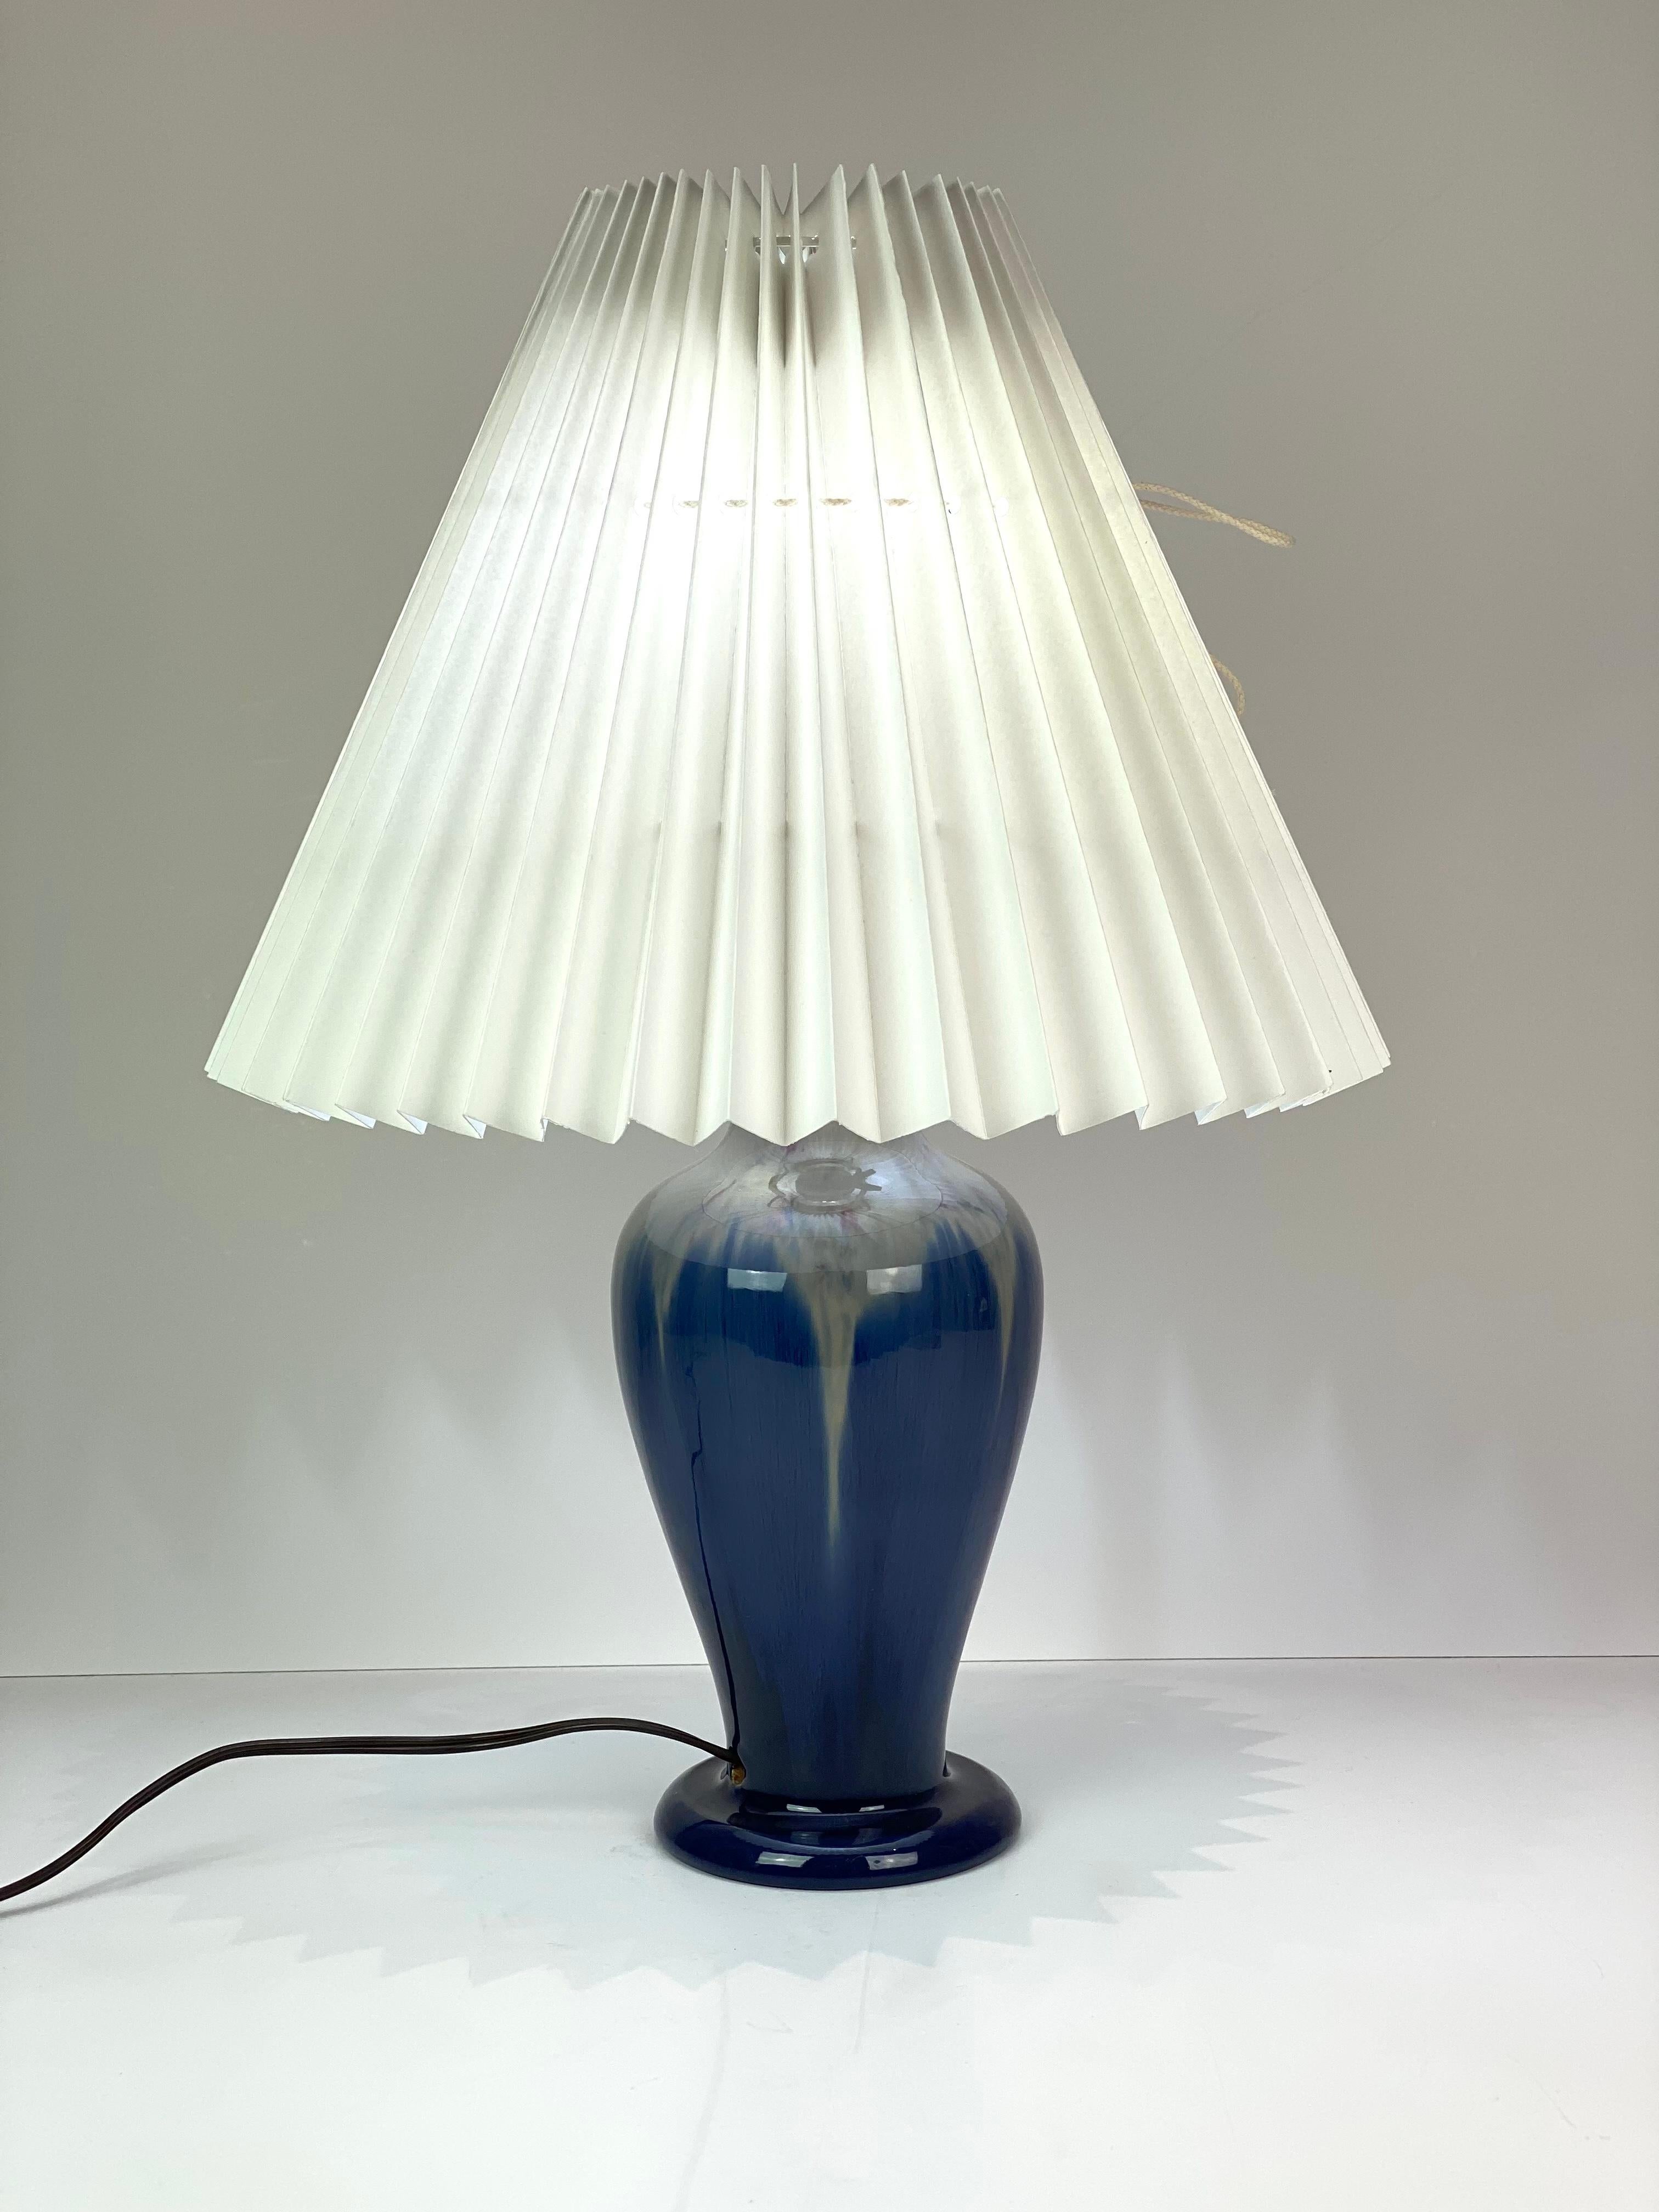 Ceramic Table Lamp with Blue Glaze and Paper Shade, by Michael Andersen 1